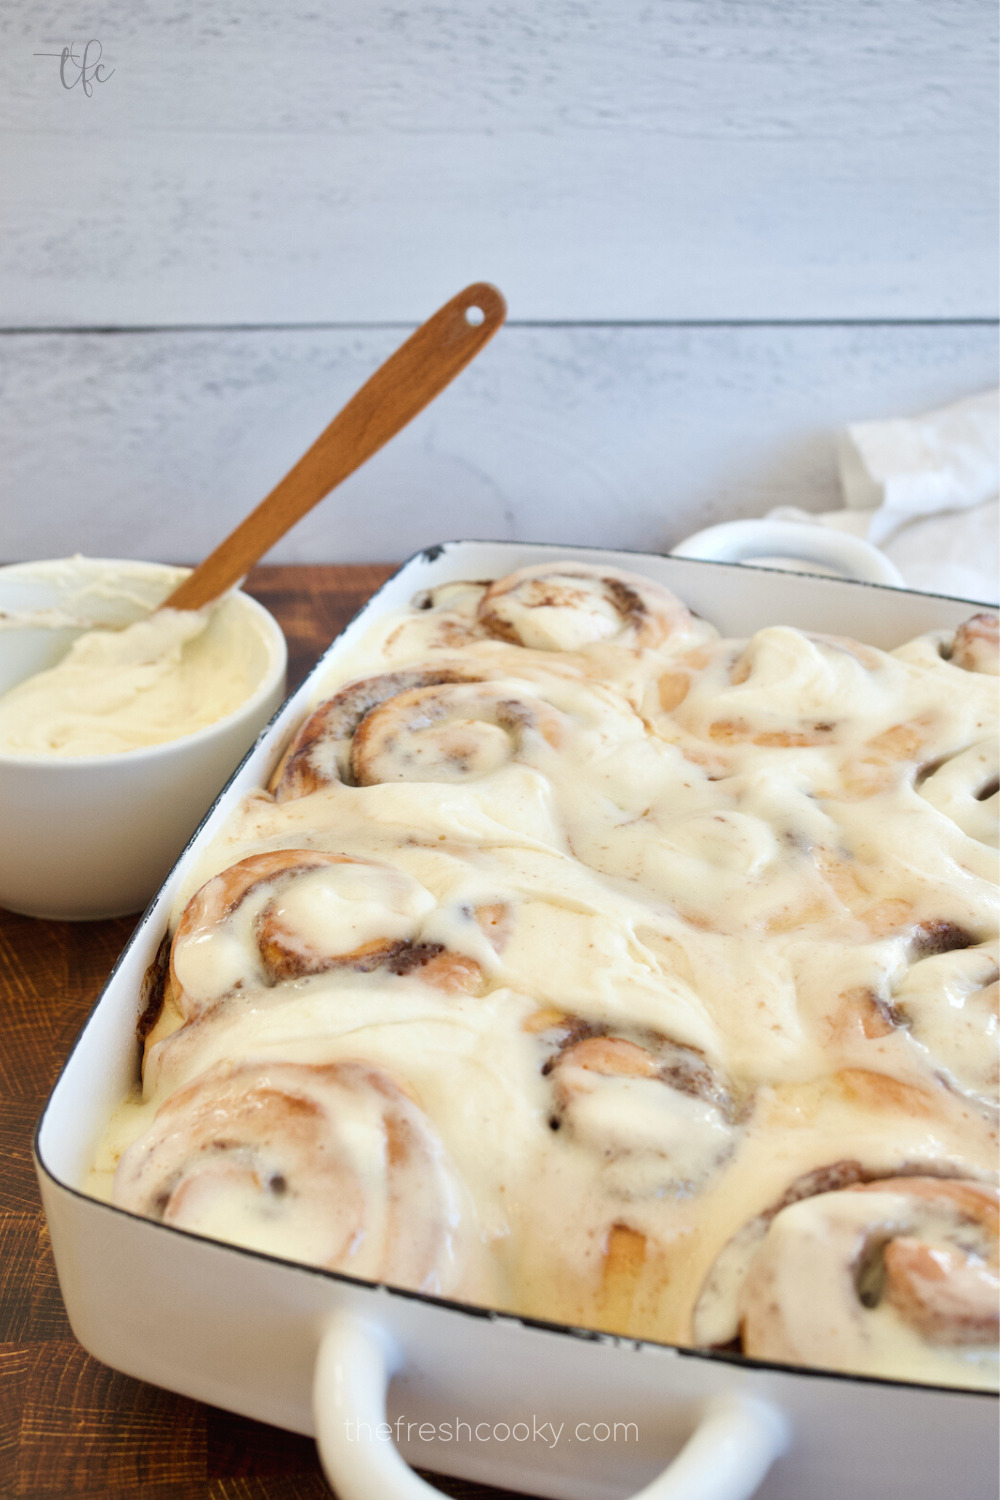 Pan filled with soft, fluffy gooey cinnamon rolls with bowl of frosting close by.